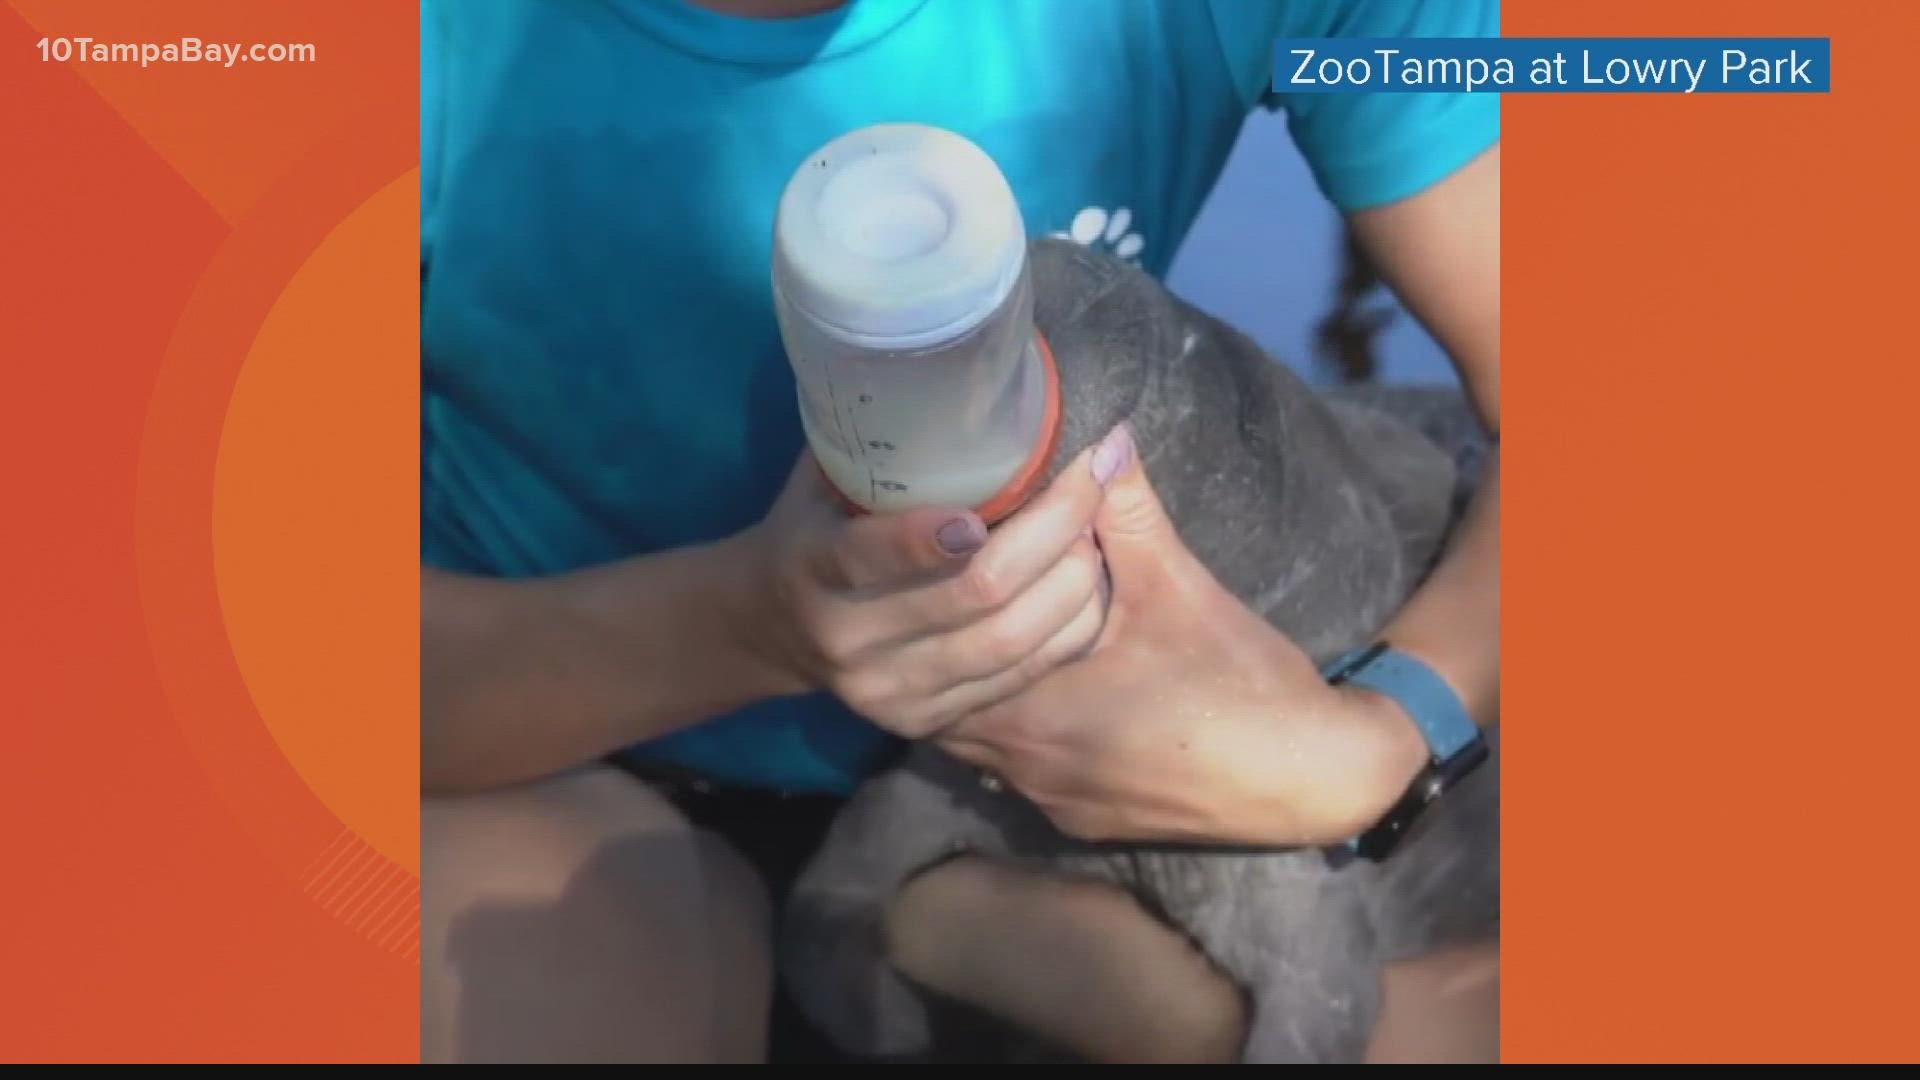 The 45-pound baby is getting bottle-fed around the clock.